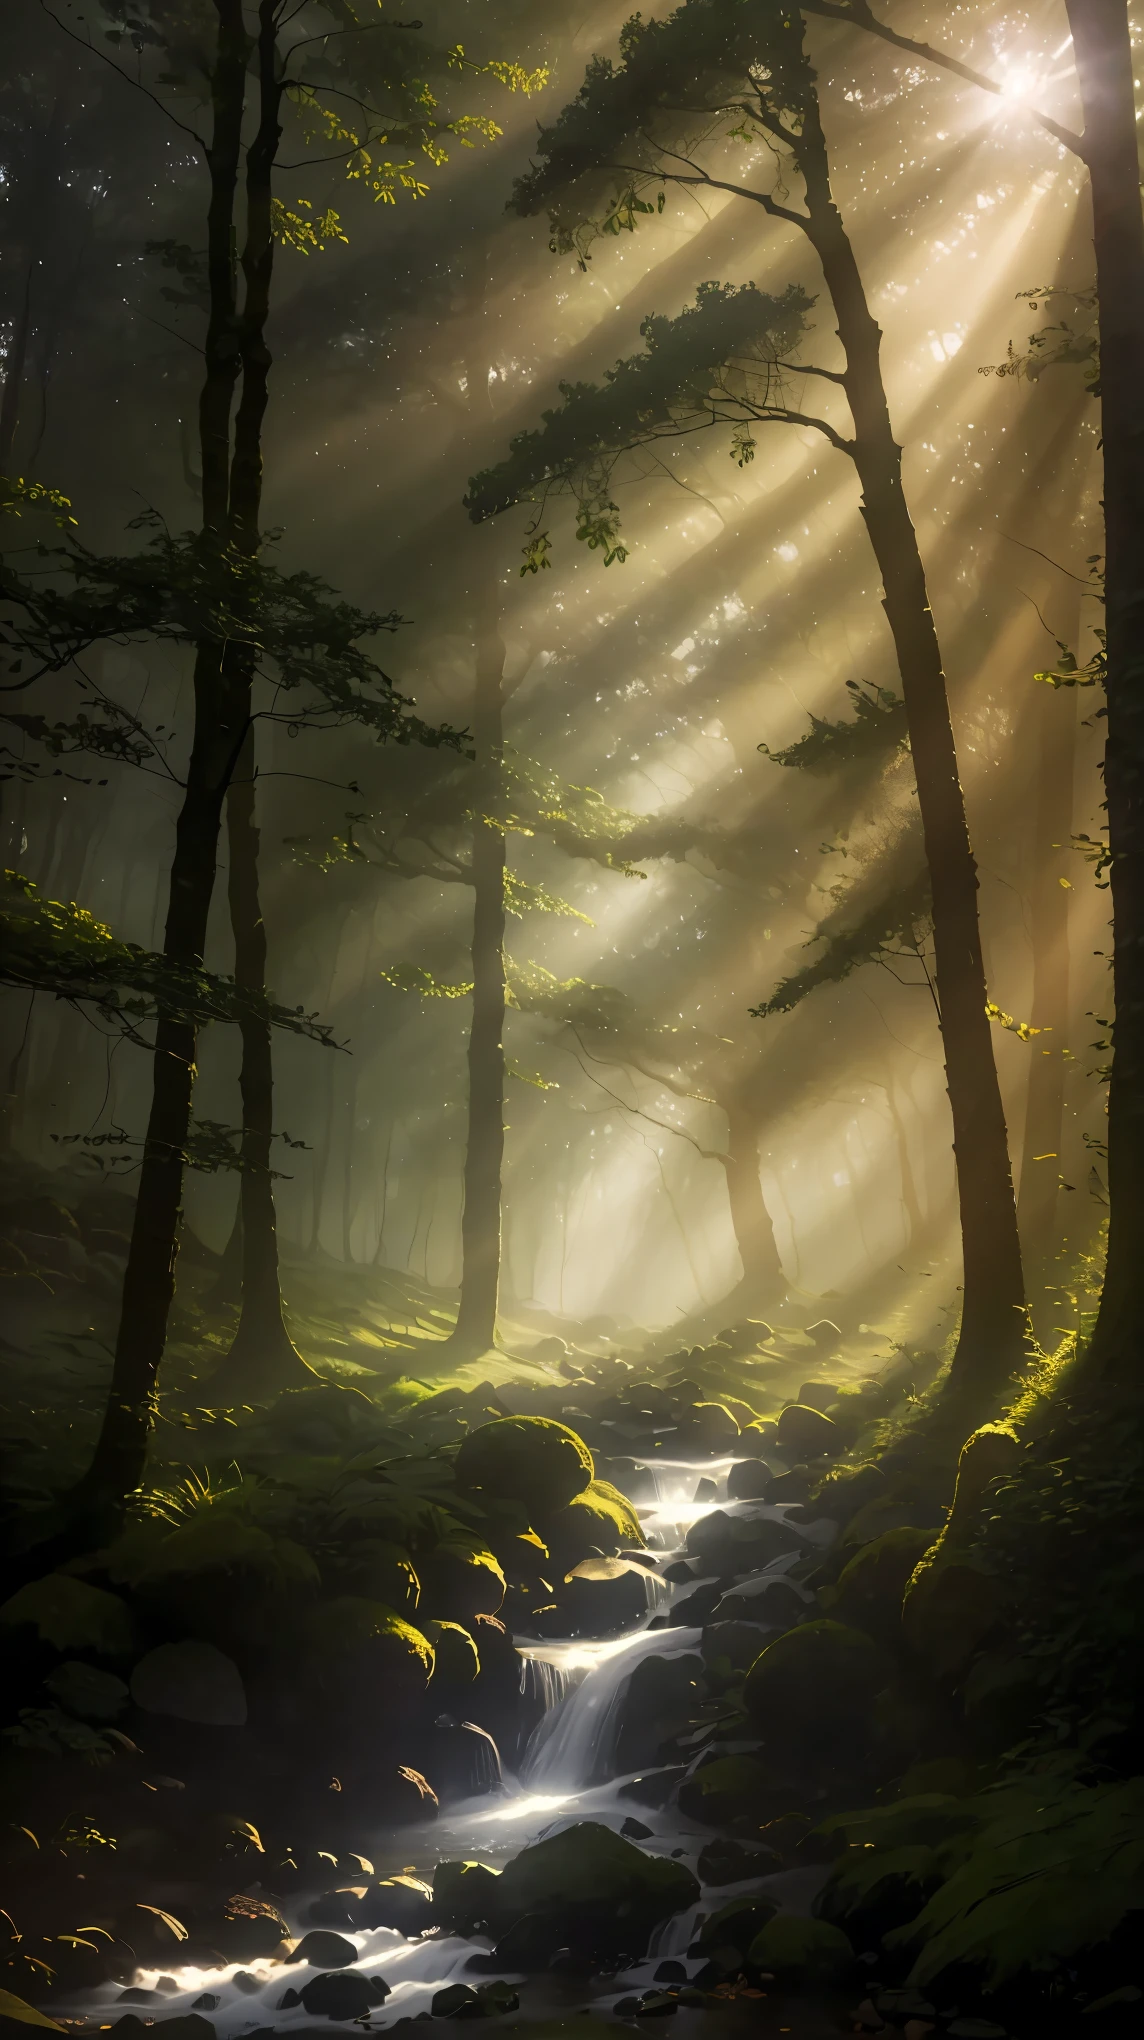  This photograph captures the ethereal beauty of a forest under the light, showcasing the Tyndall effect. As the sun shines through the trees, water vapor creates a mystical atmosphere. The distant glow adds to the intrigue of this enchanted forest, making it a perfect setting for exploration and adventure.